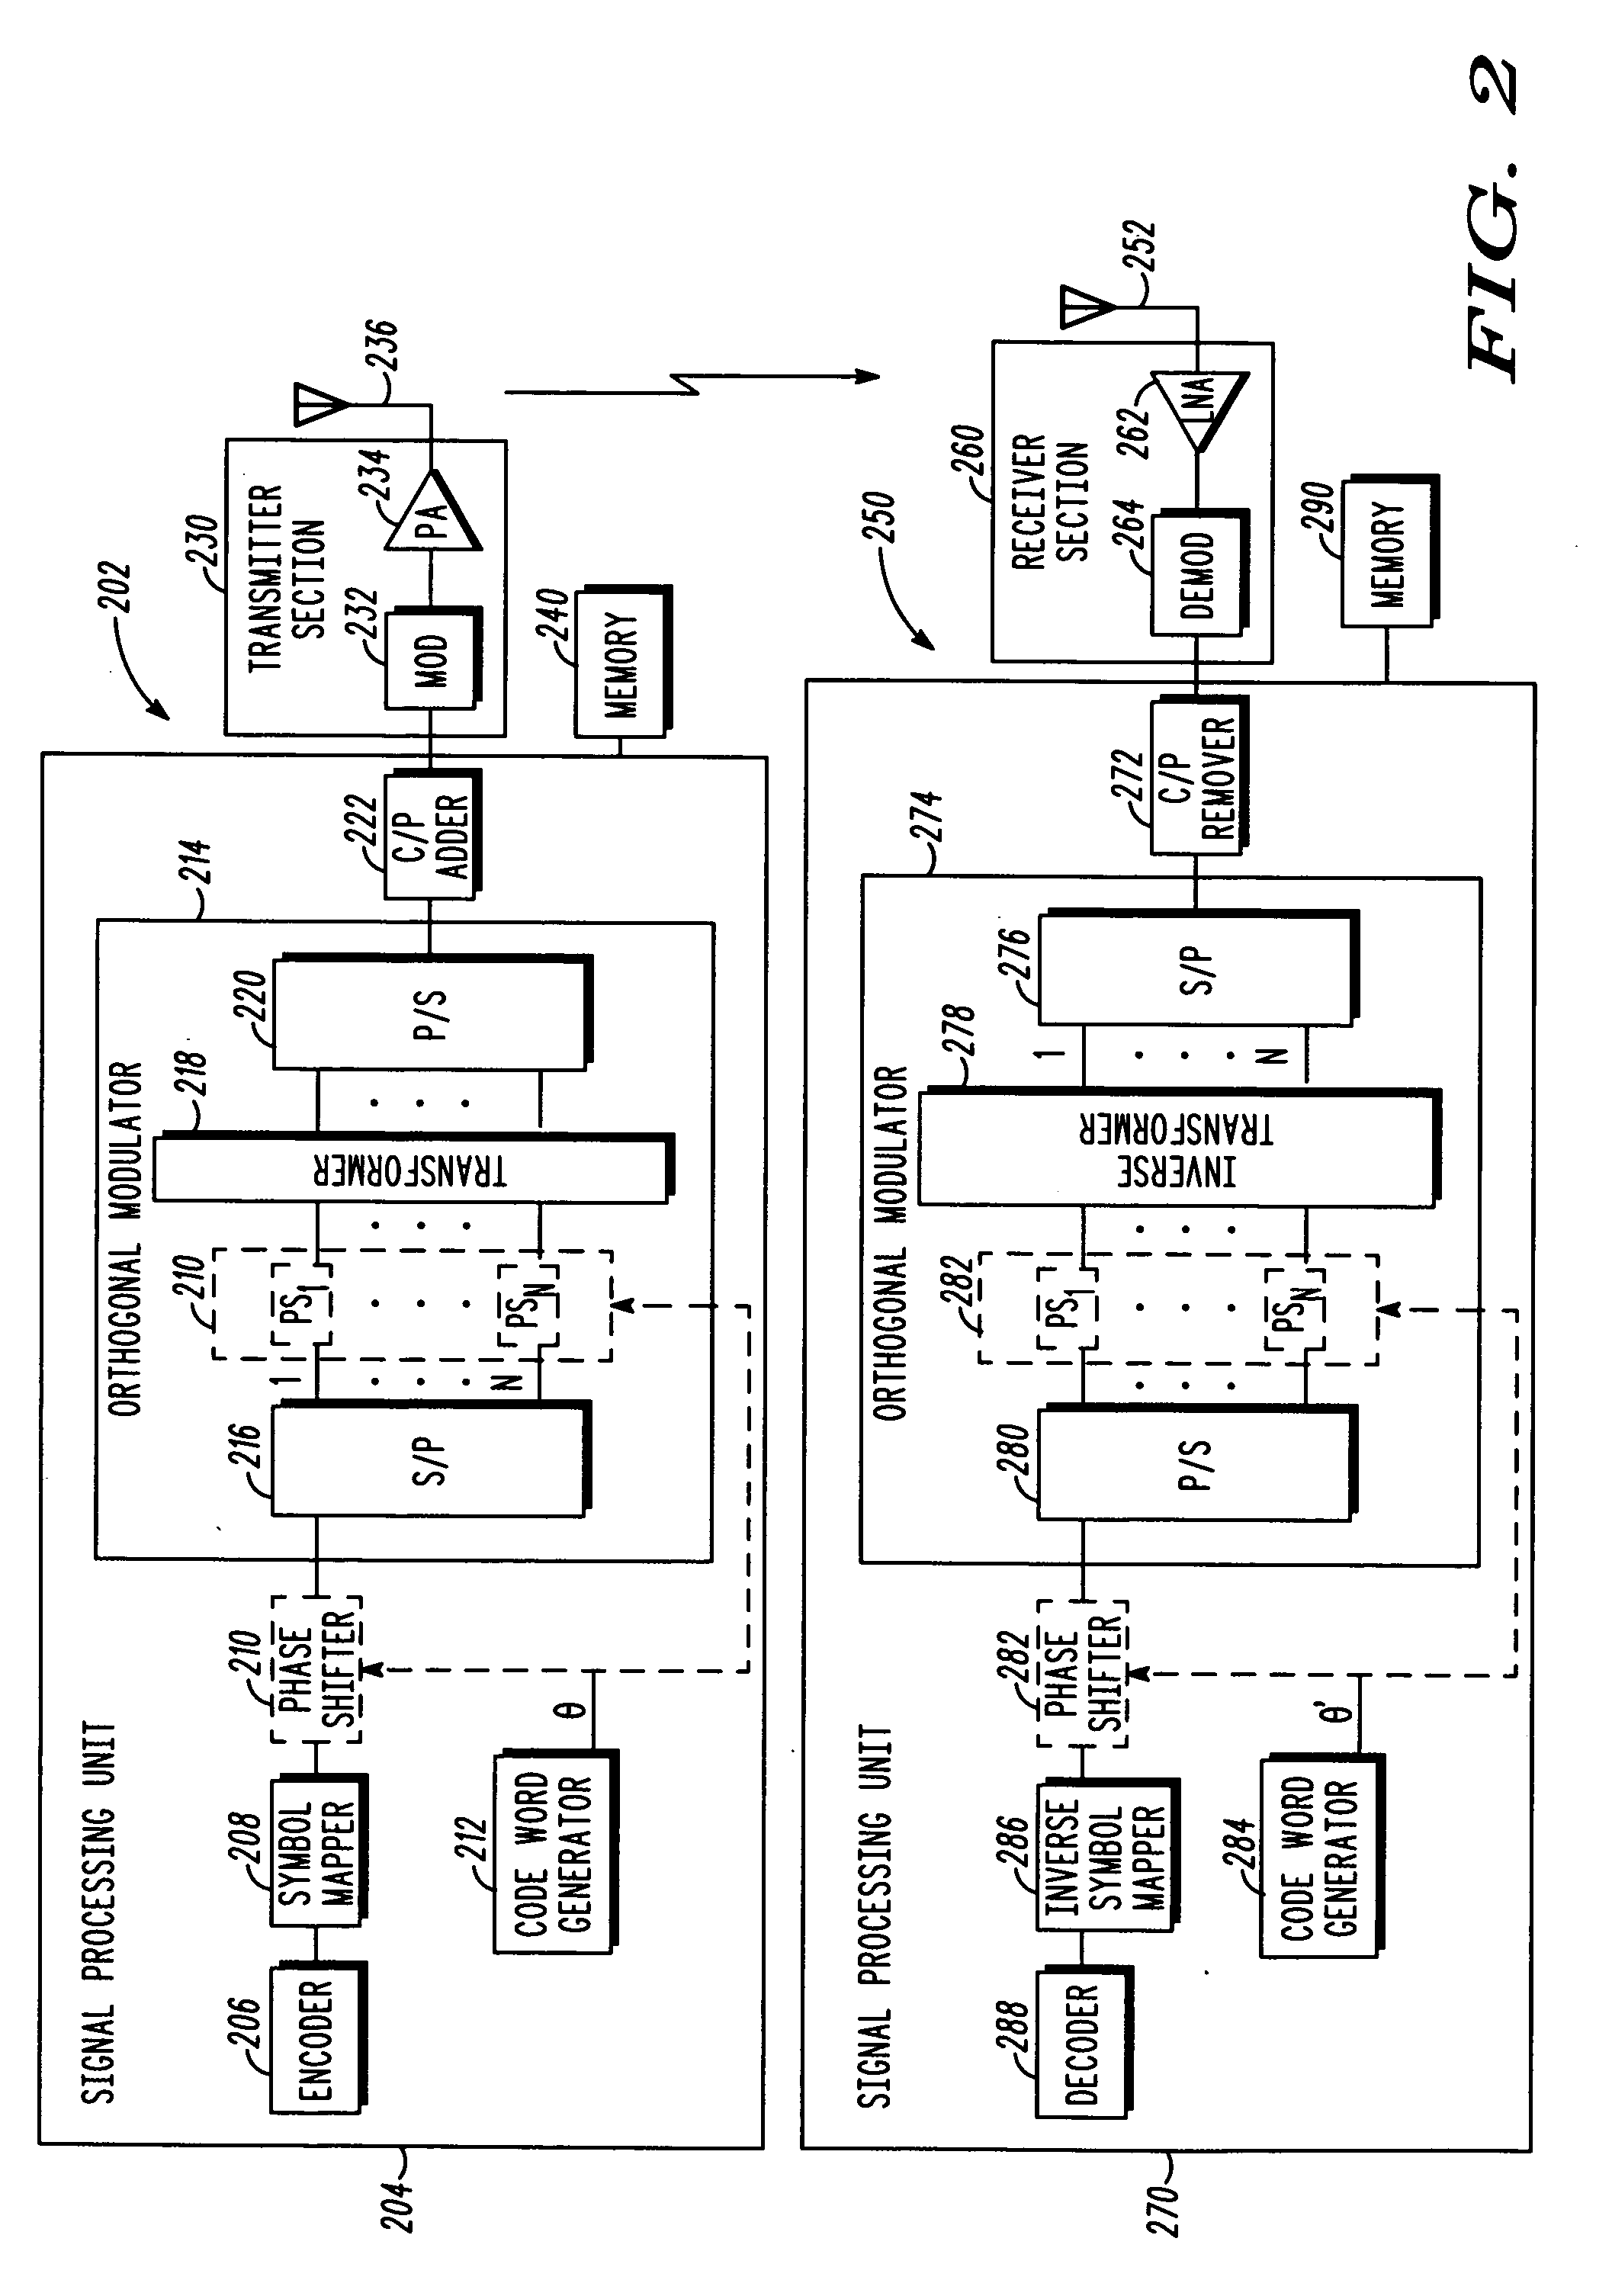 Meathod and apparatus for encryption of over-the-air communications in a wireless communication system